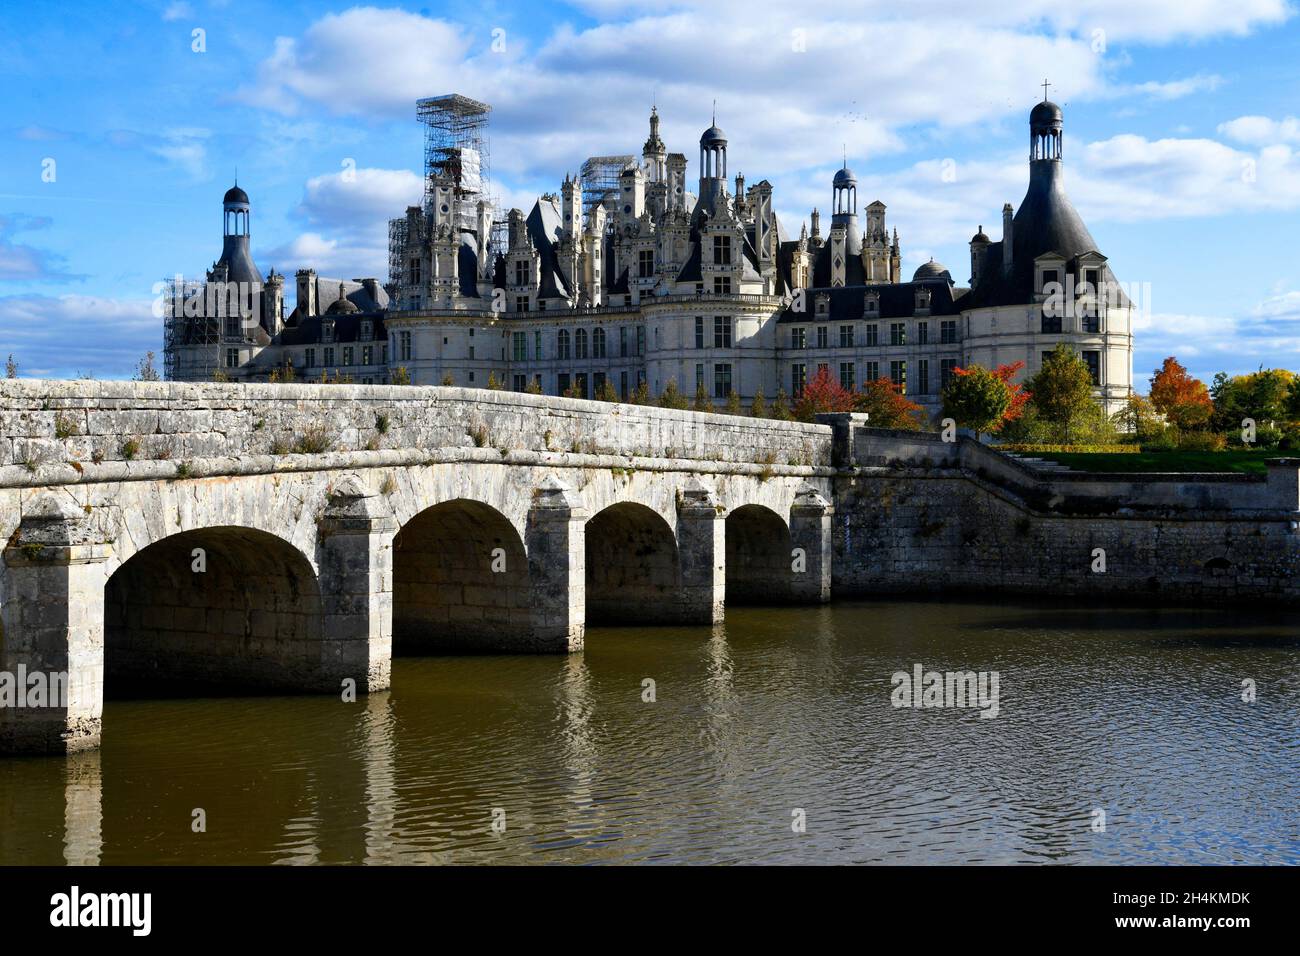 Chateau de Chambord, royal medieval french castle in the Loire Valley, France, Europe. Stock Photo